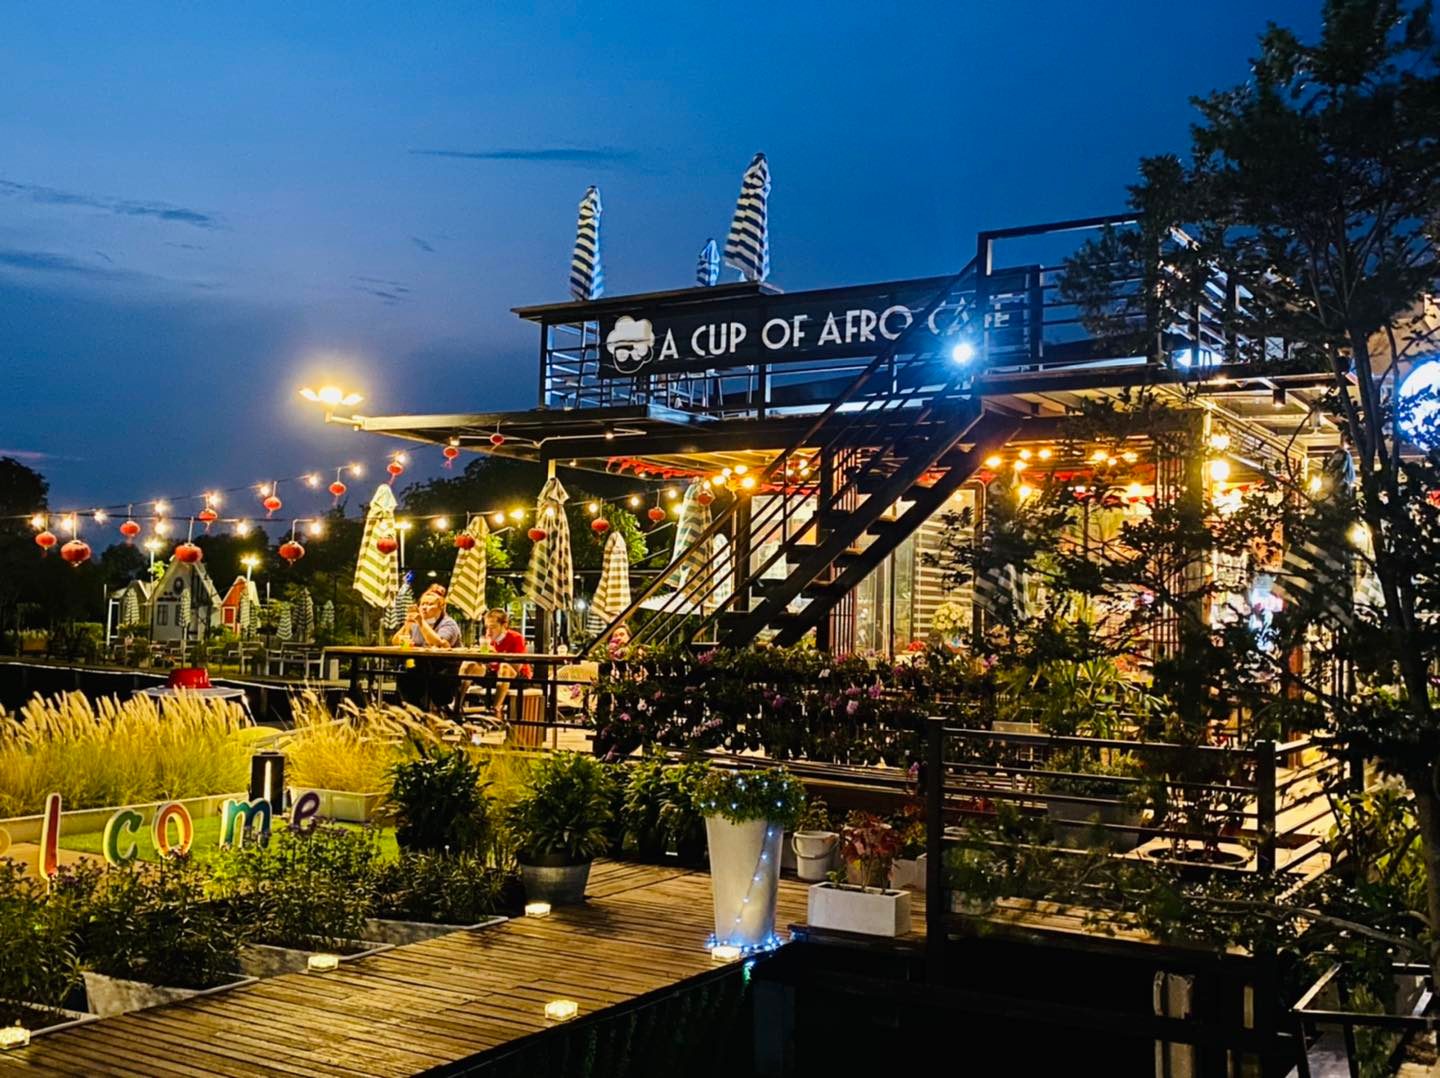 A Cup of Afro Cafe (A Cup of Afro Cafe) : Samut Sakhon (สมุทรสาคร)